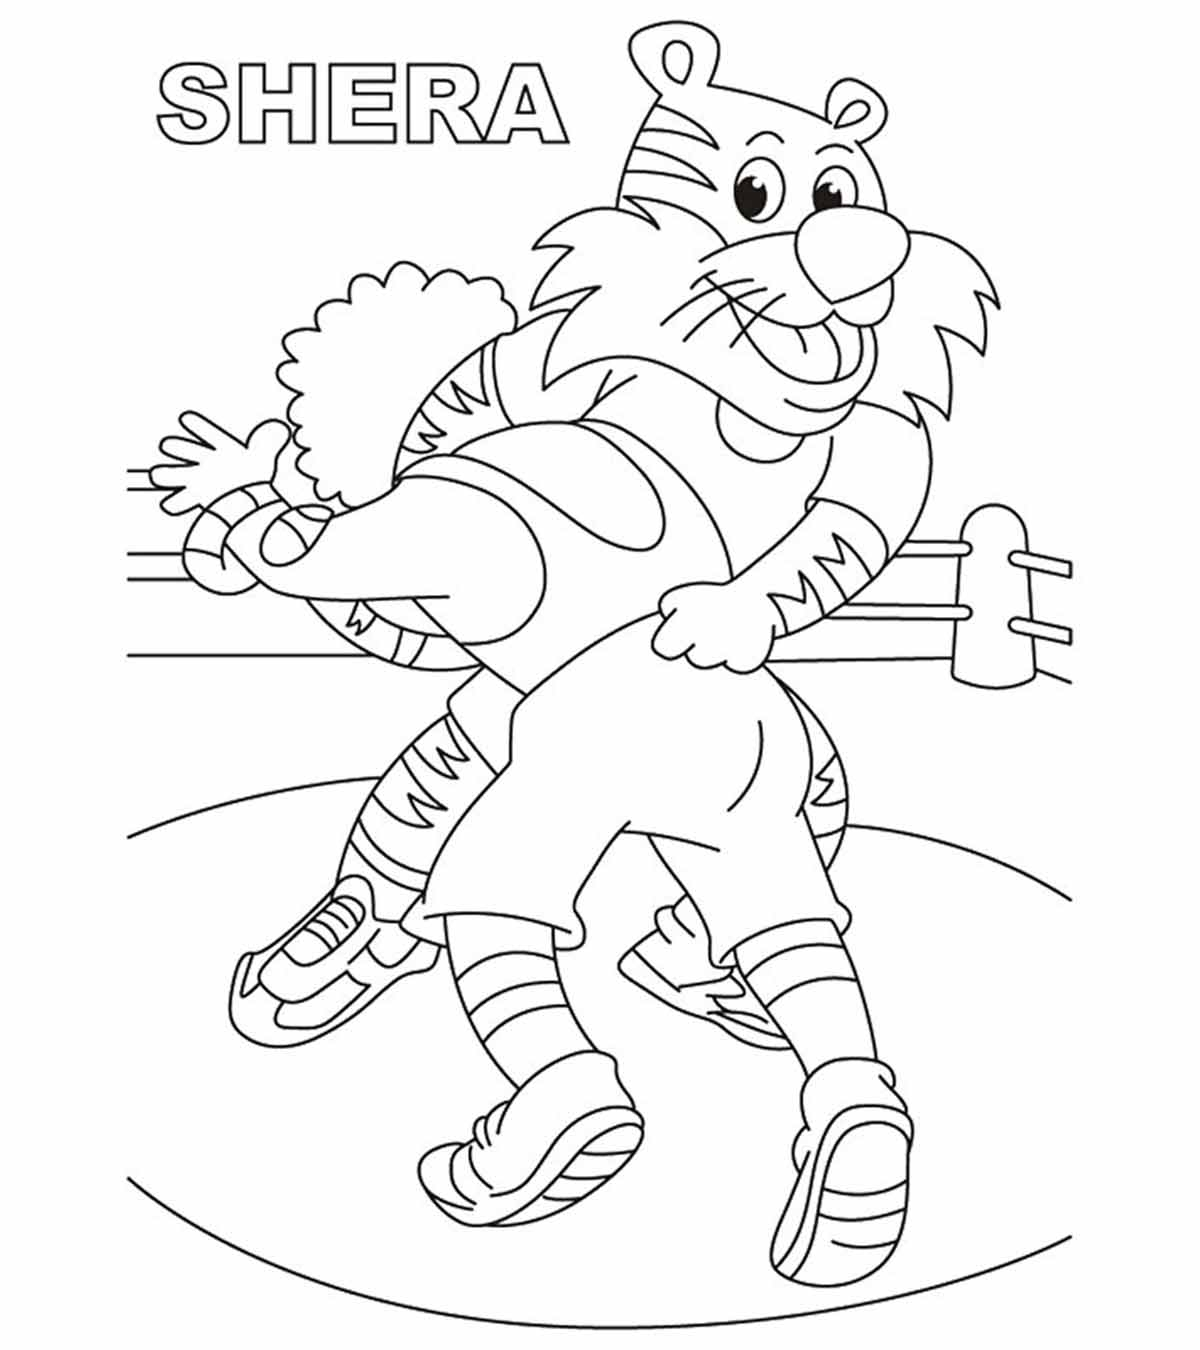 Wwe Wrestling Coloring Pages Top 10 Wrestling Coloring Pages For Your Little One